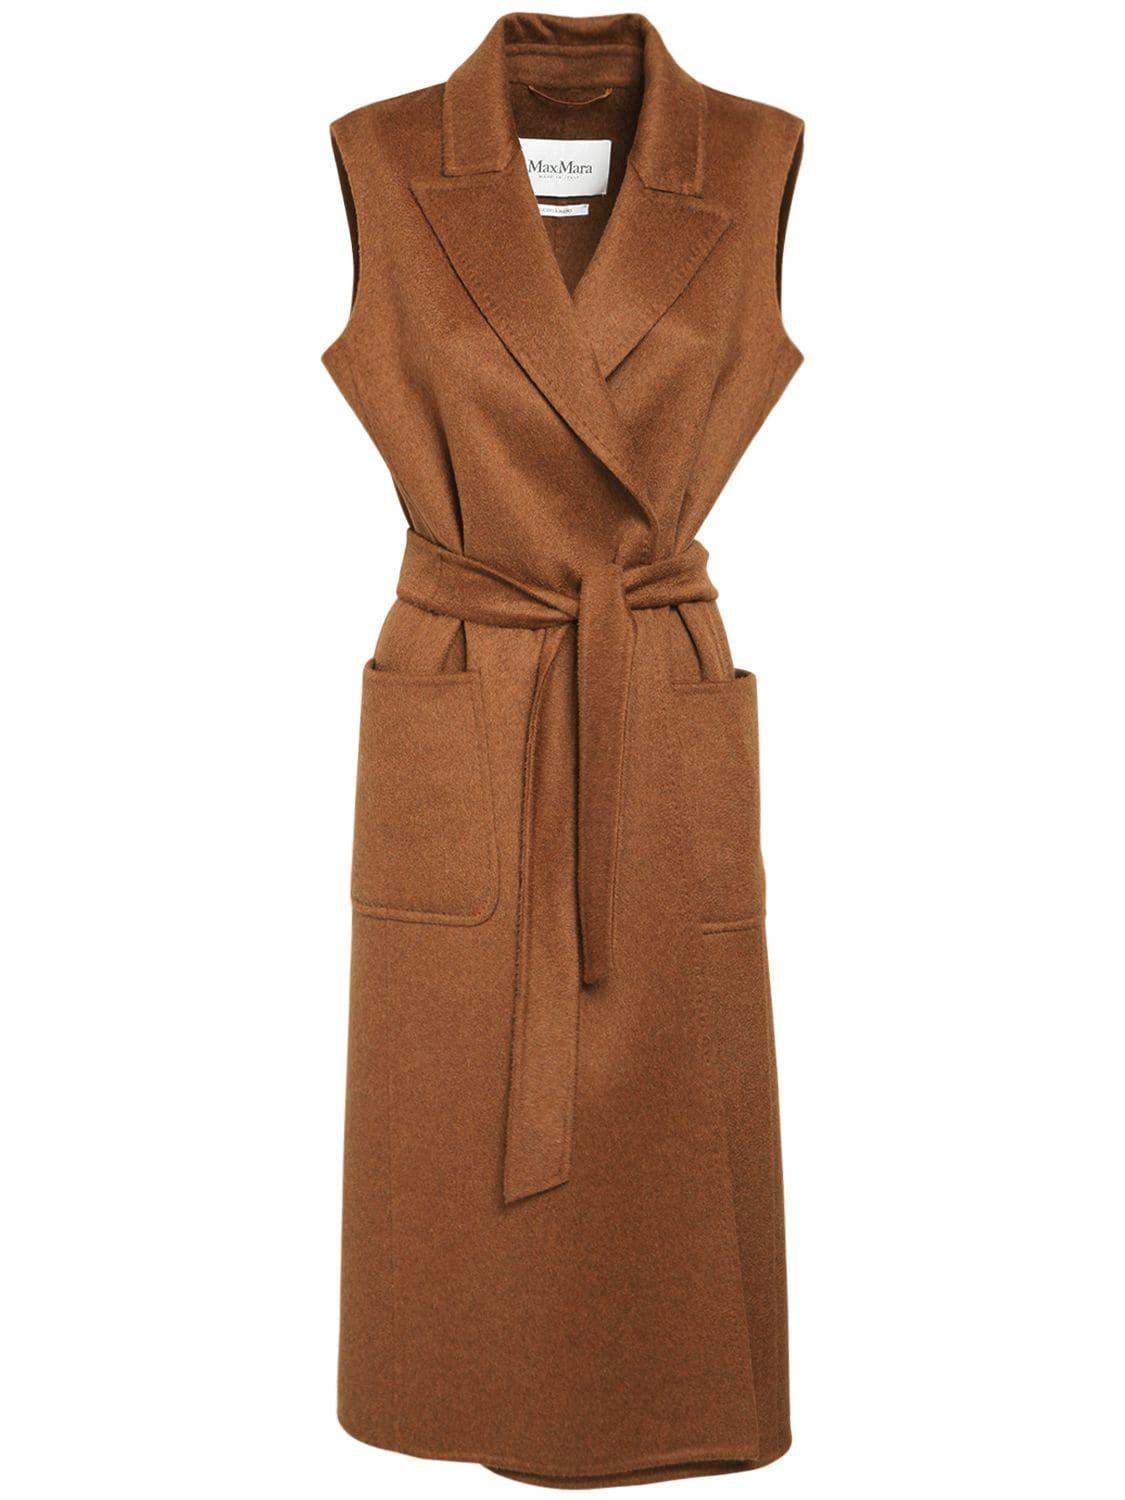 Max Mara Camel & Cashmere Long Vest in Brown | Lyst